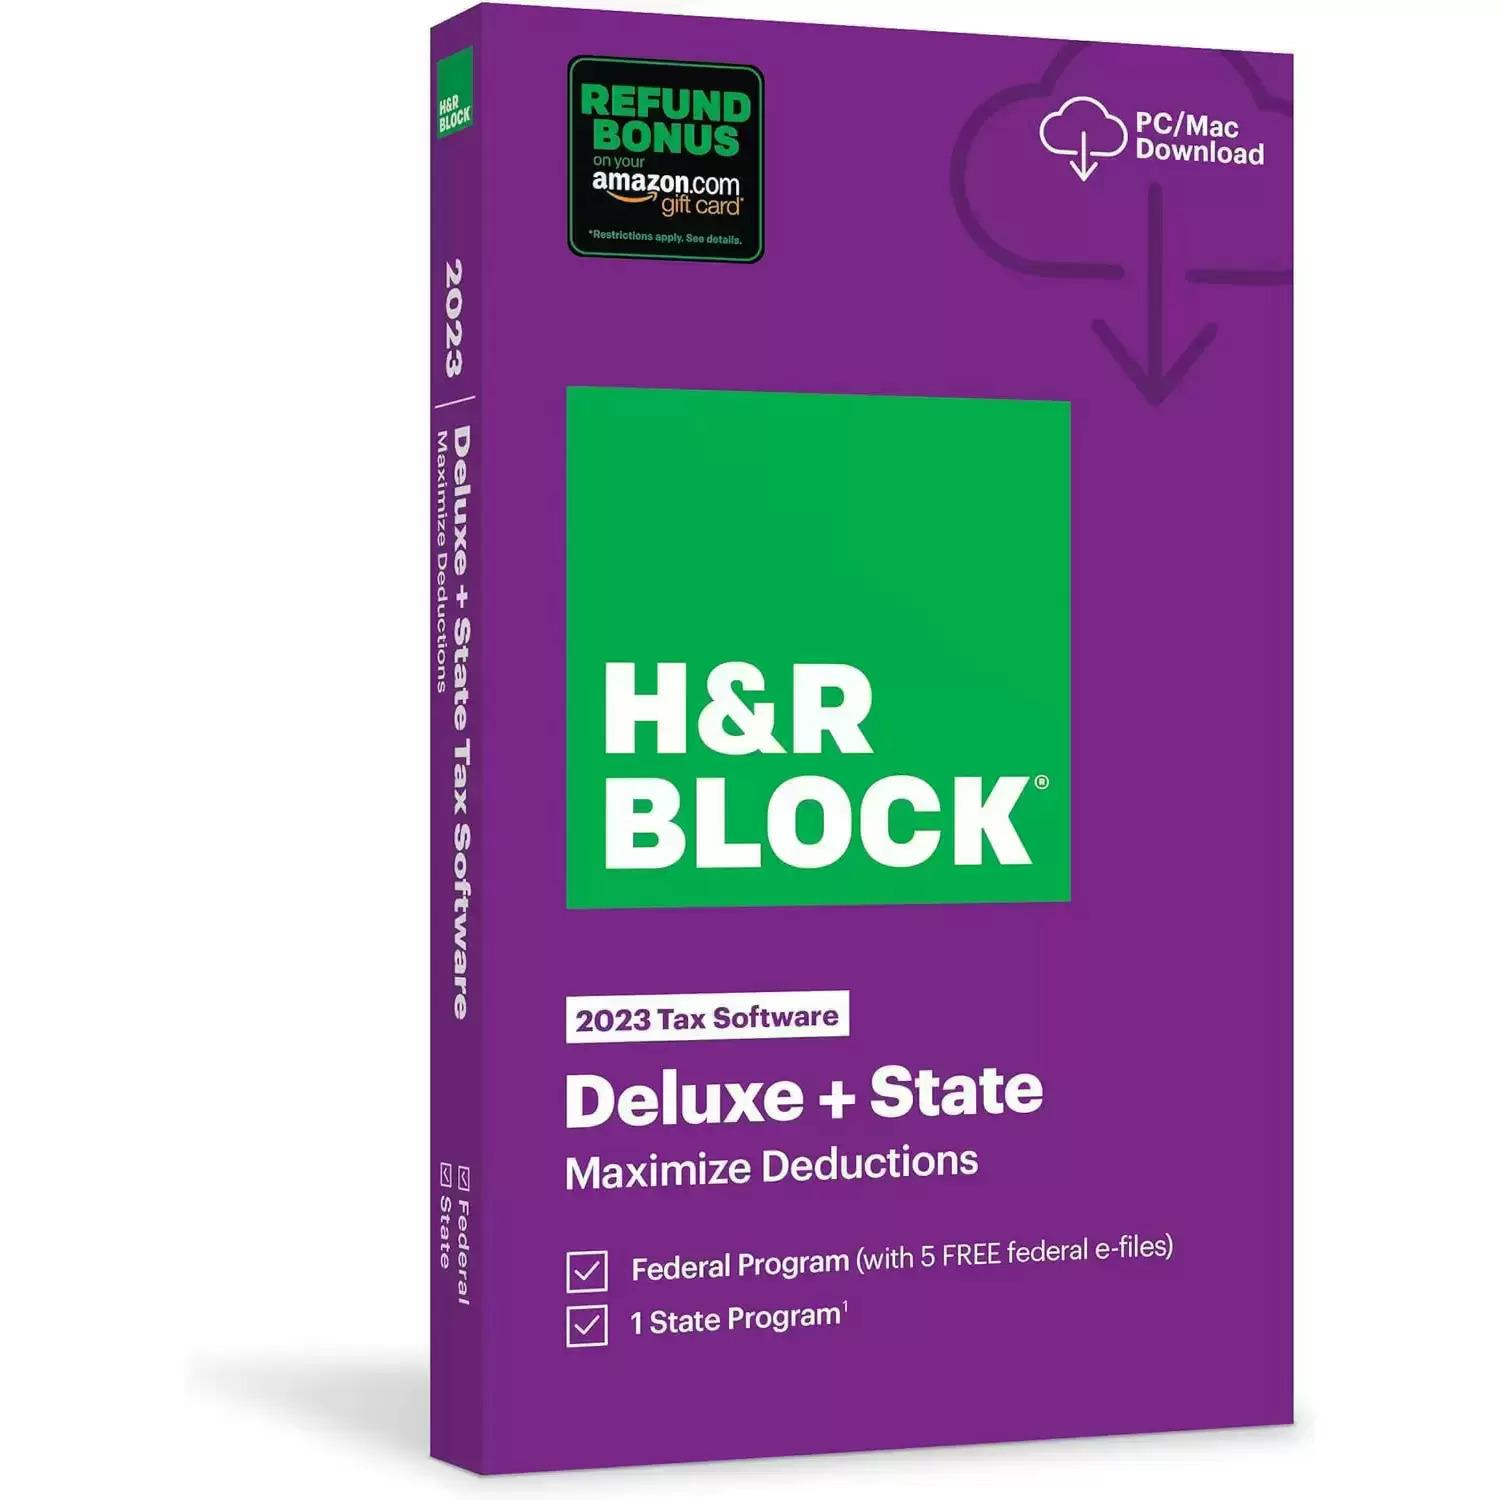 HR Block Tax Software Deluxe with State 2023 for $19.99 Shipped